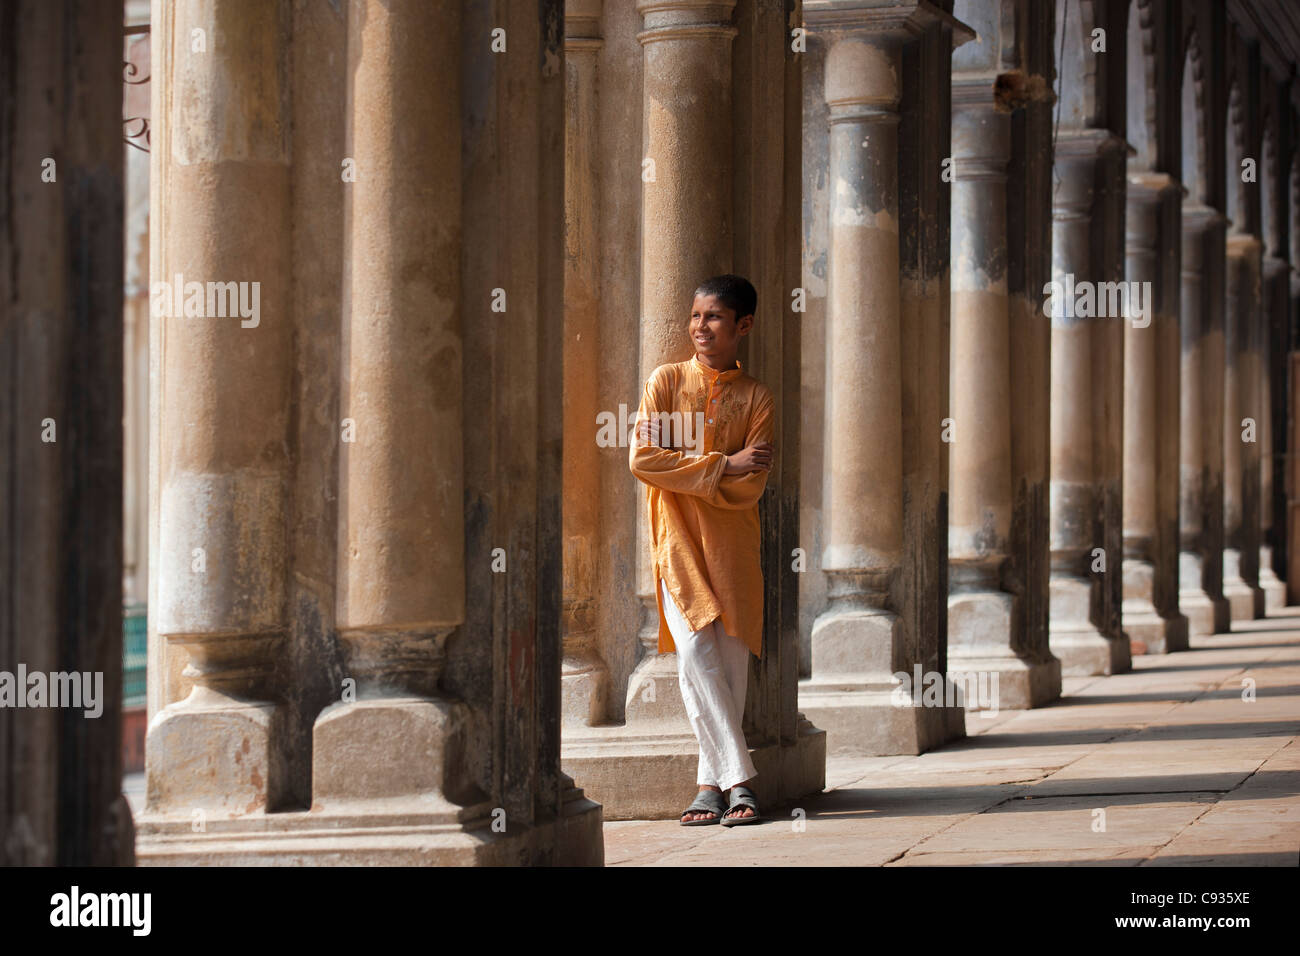 A student relaxes beside the pillars of the impressive Hugli Imambara building. Stock Photo